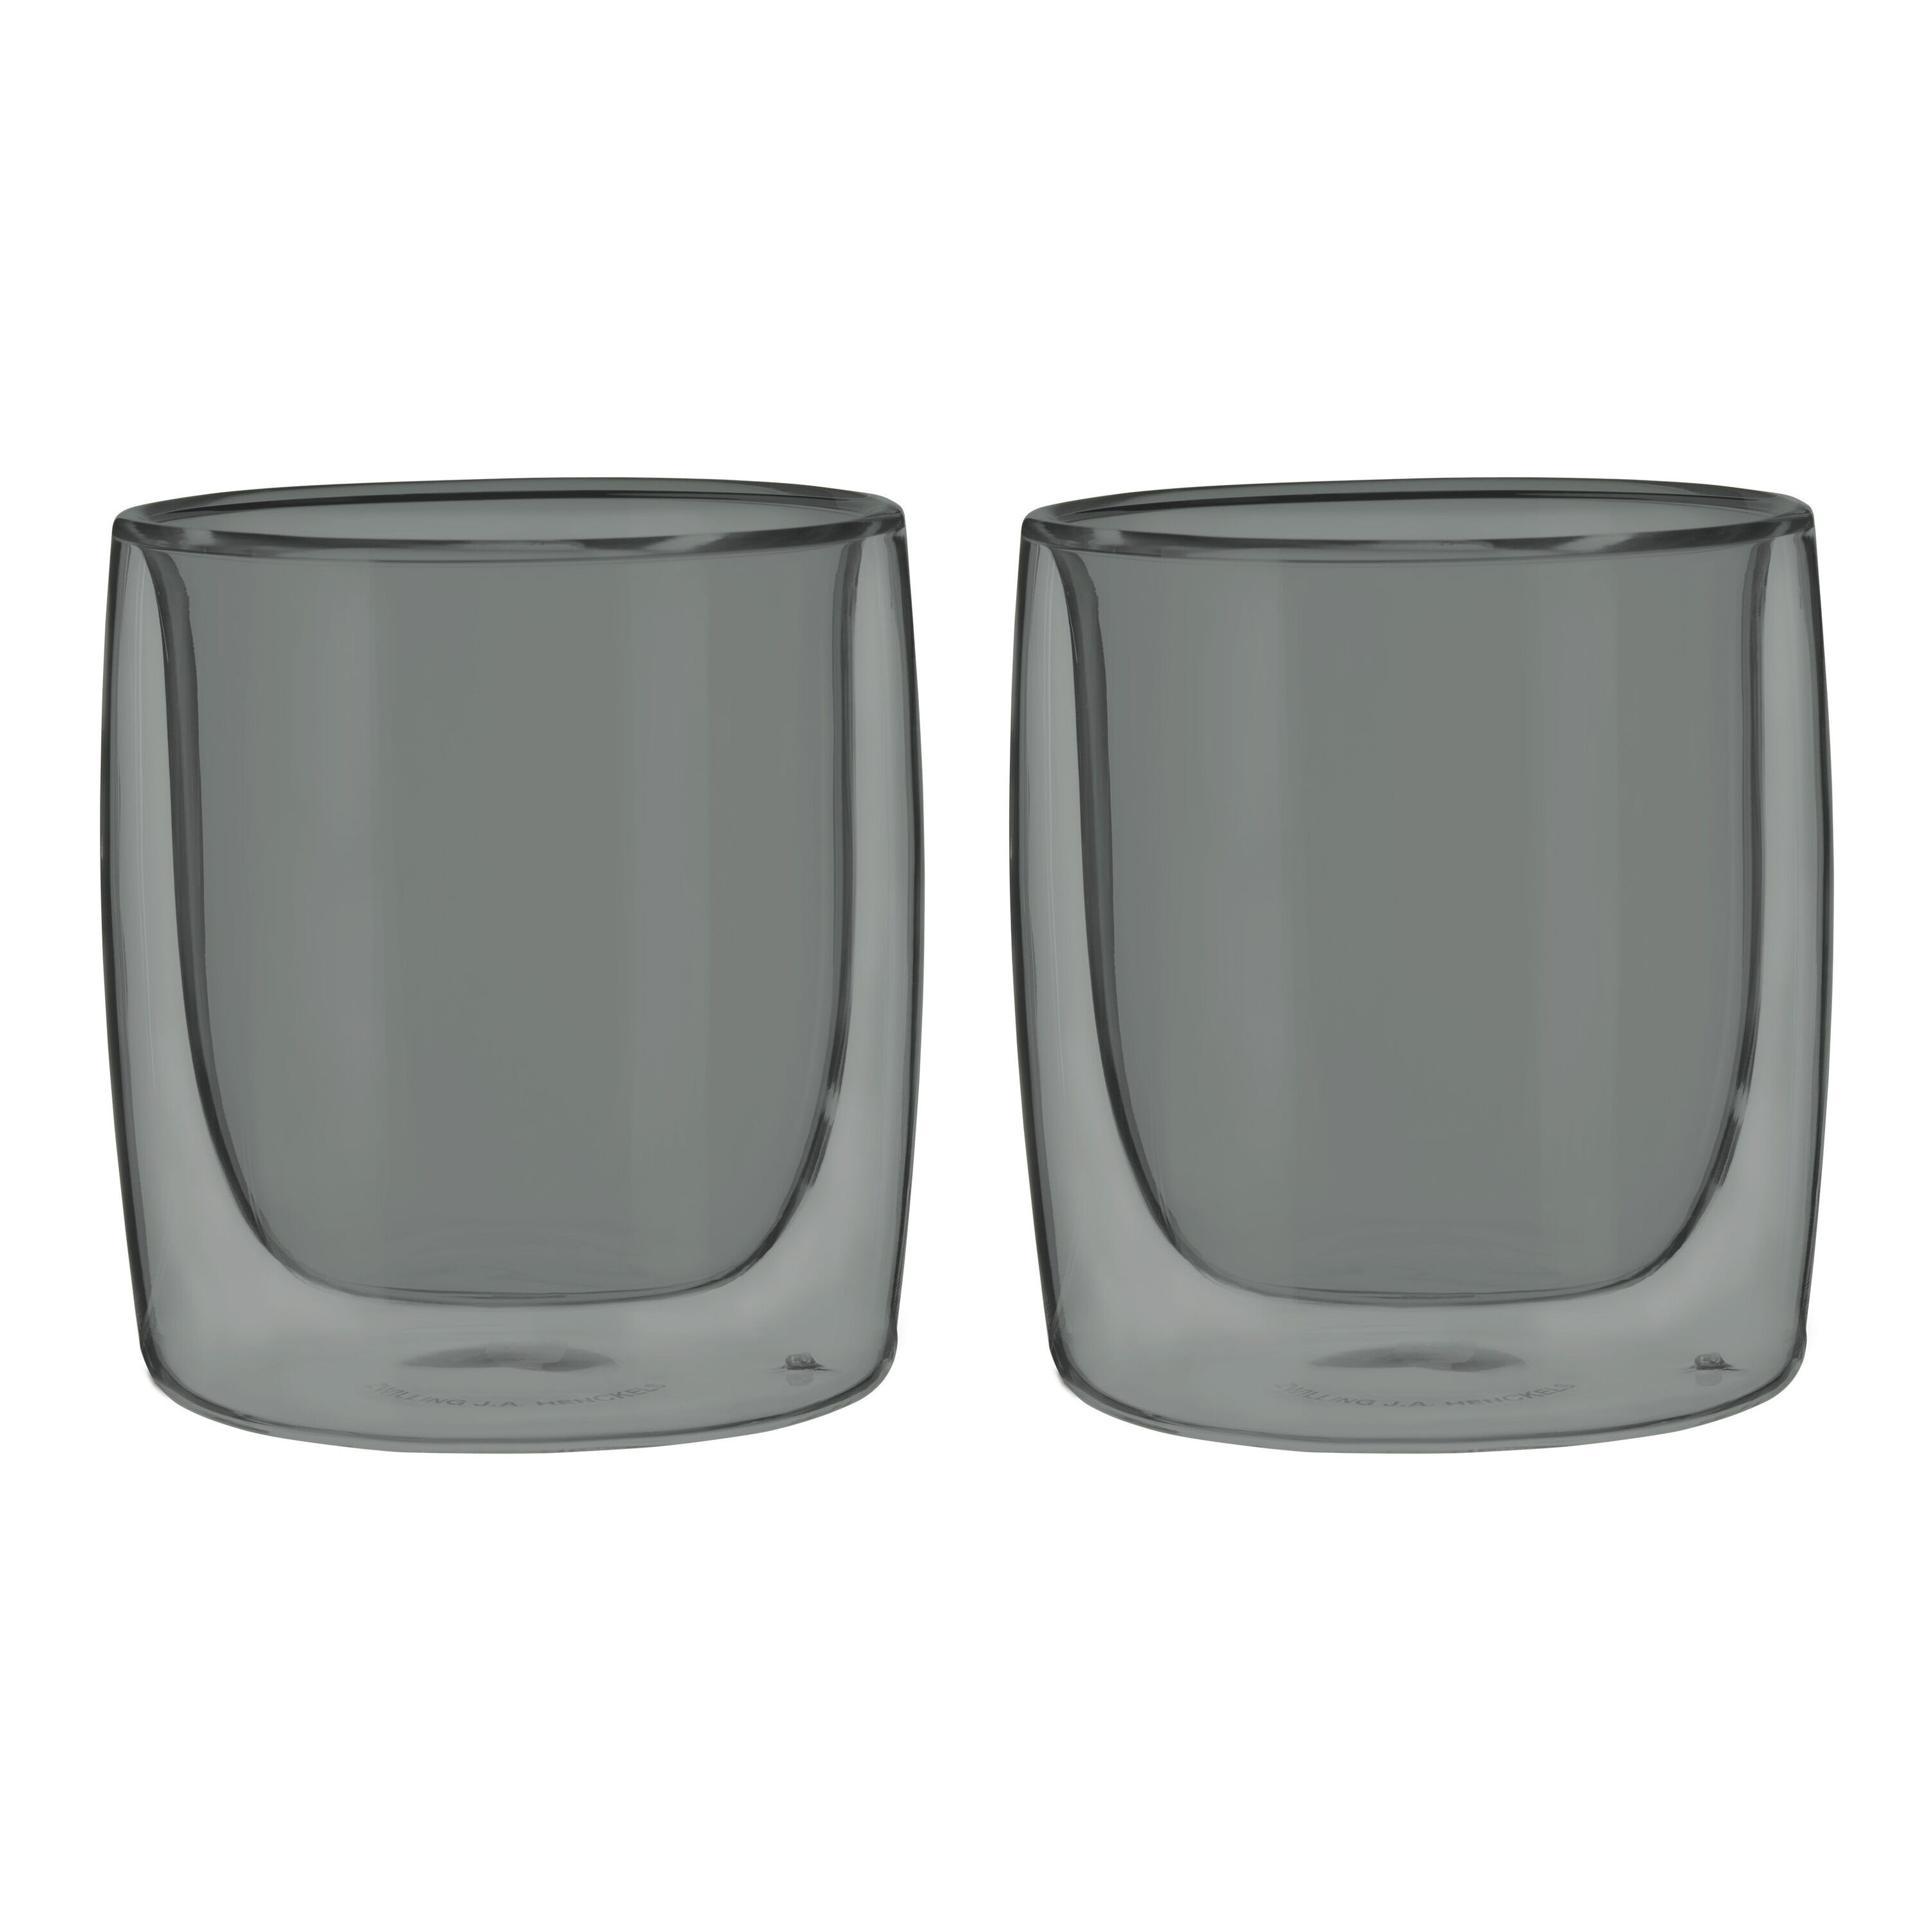 ZWILLING SORRENTO DOUBLE WALL GLASSWARE 10-OZ STEMLESS WHITE WINE GLASS SET  OF 2 — Grand Fête